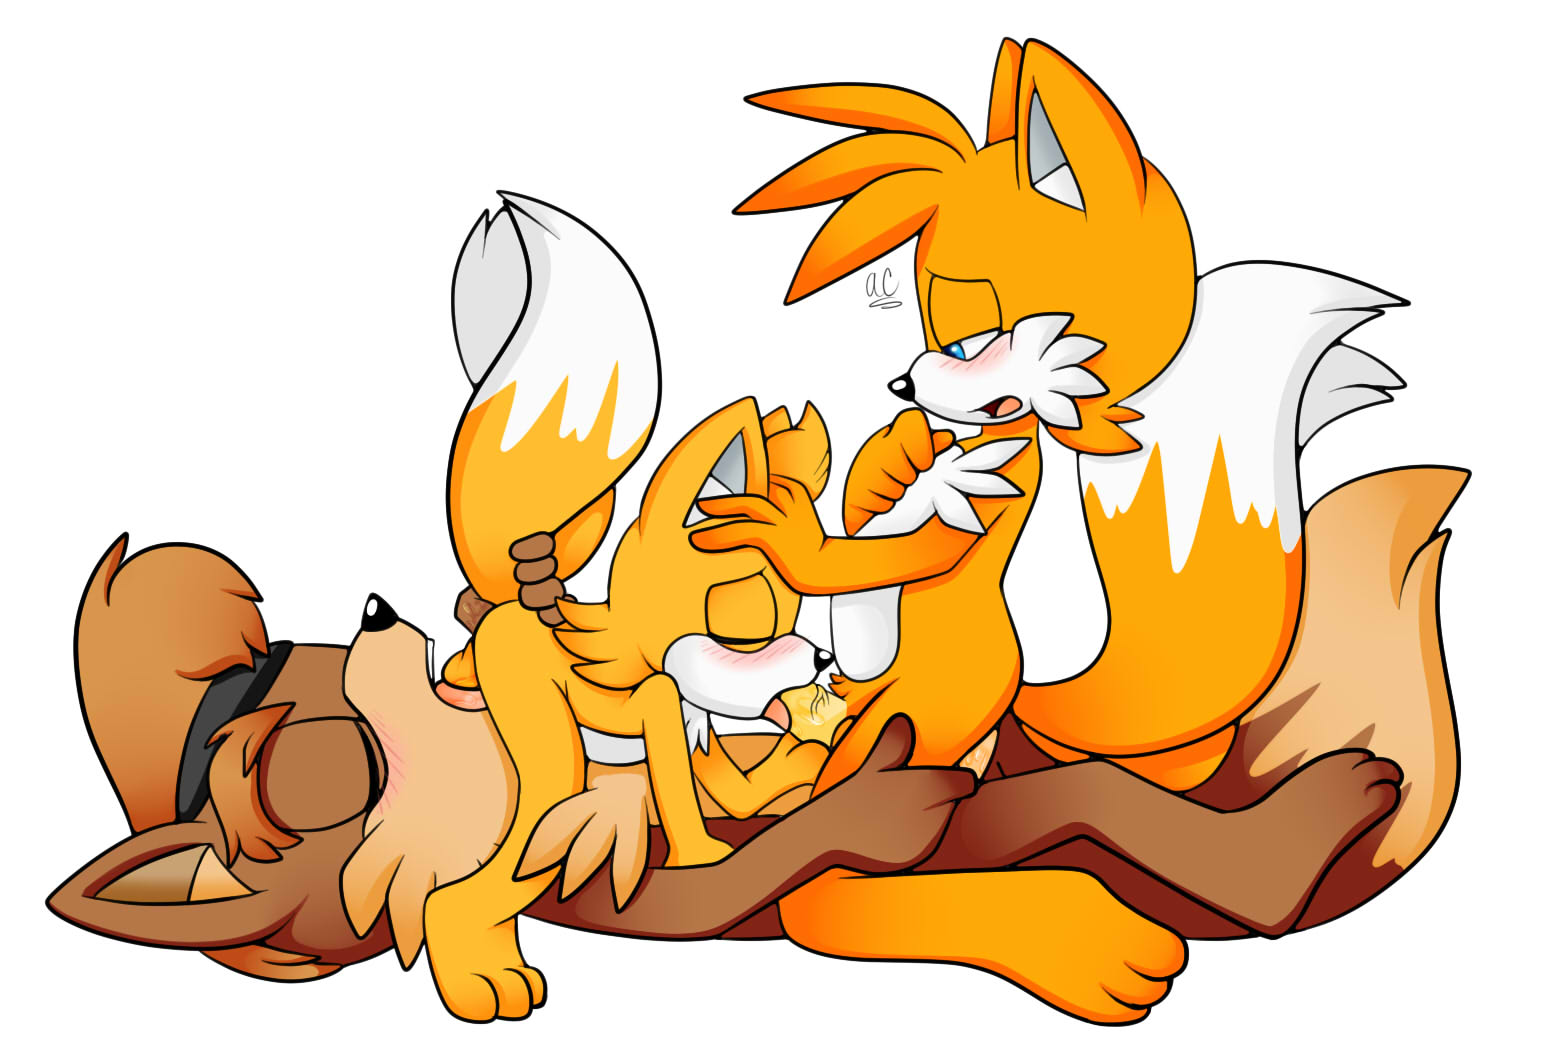 Tails gay threesome